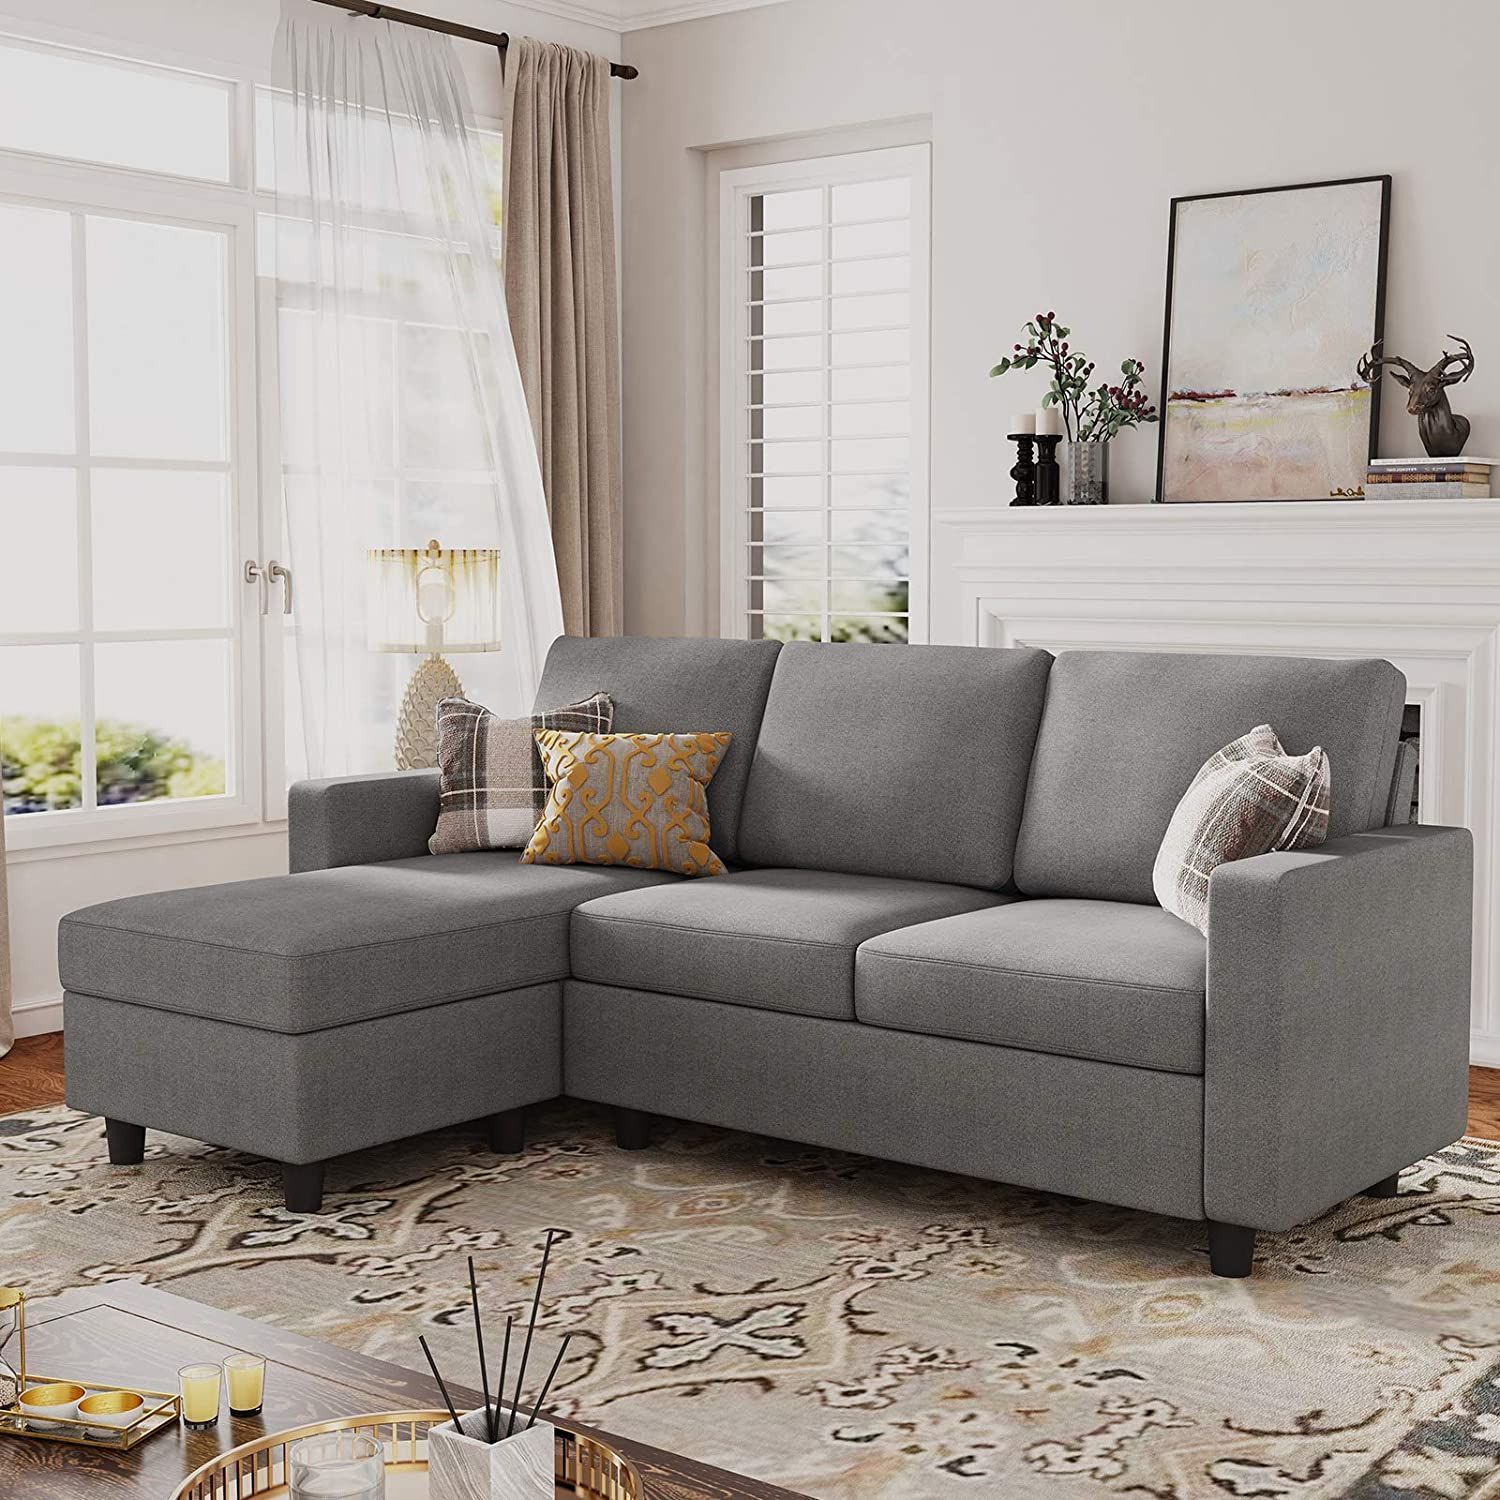 Honbay Dryades L Shaped Sectional Sofa, Gray Fabric – Walmart | Sofas  For Small Spaces, Couches For Small Spaces, Sectional Sofa Couch Throughout L Shapped Apartment Sofas (View 5 of 15)